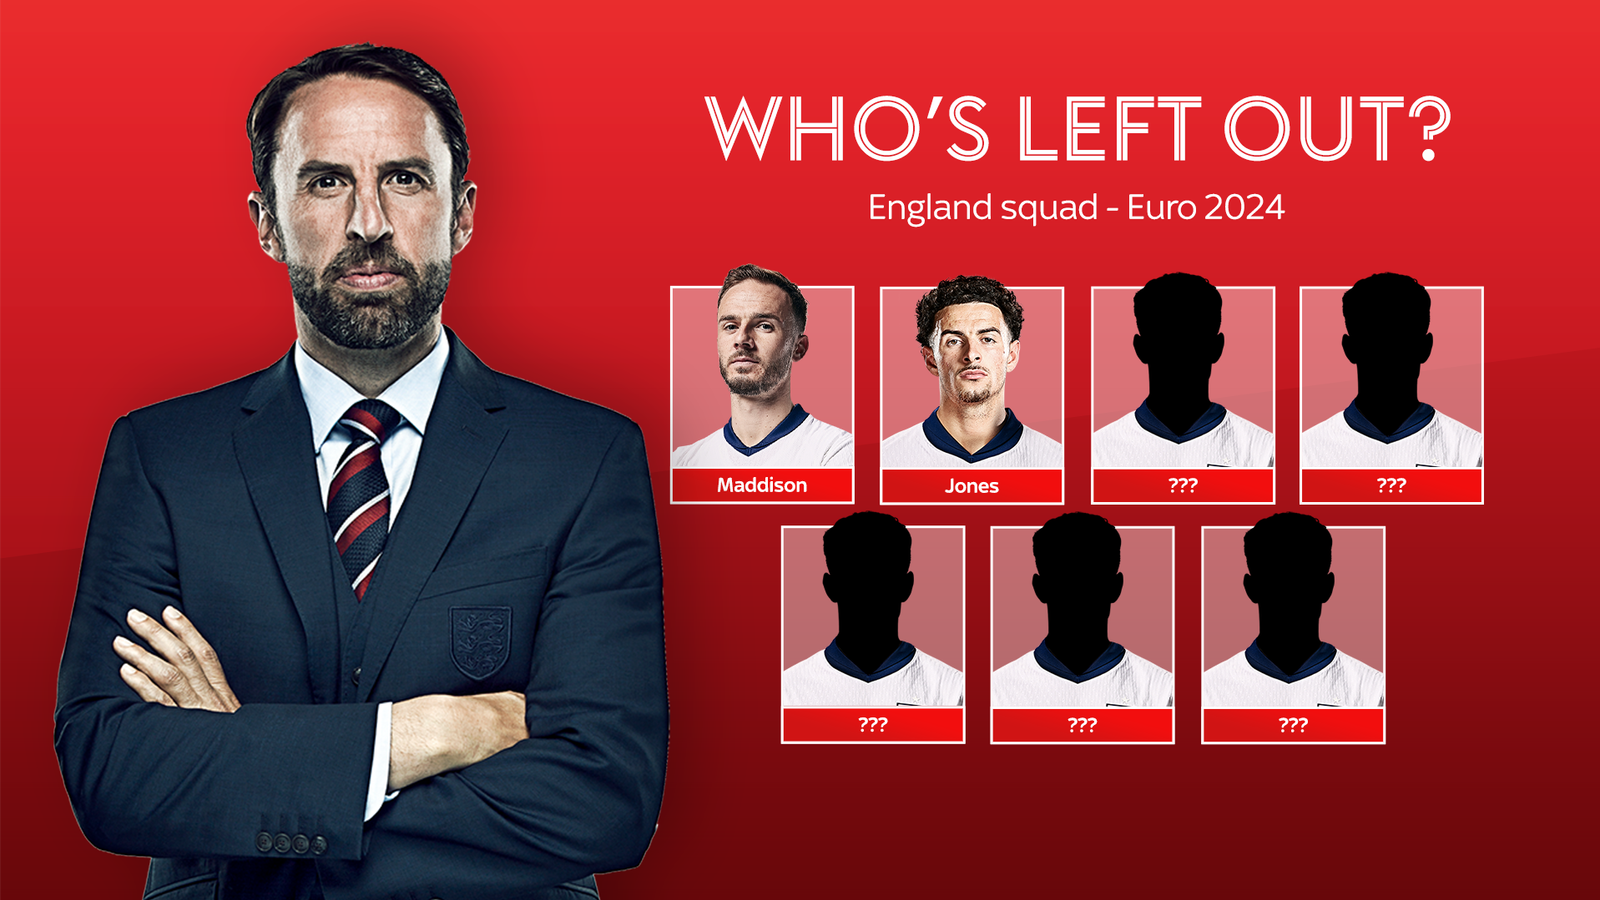 England's Euro 2024 squad: Who will Gareth Southgate take to Germany and who is sweating on their place?